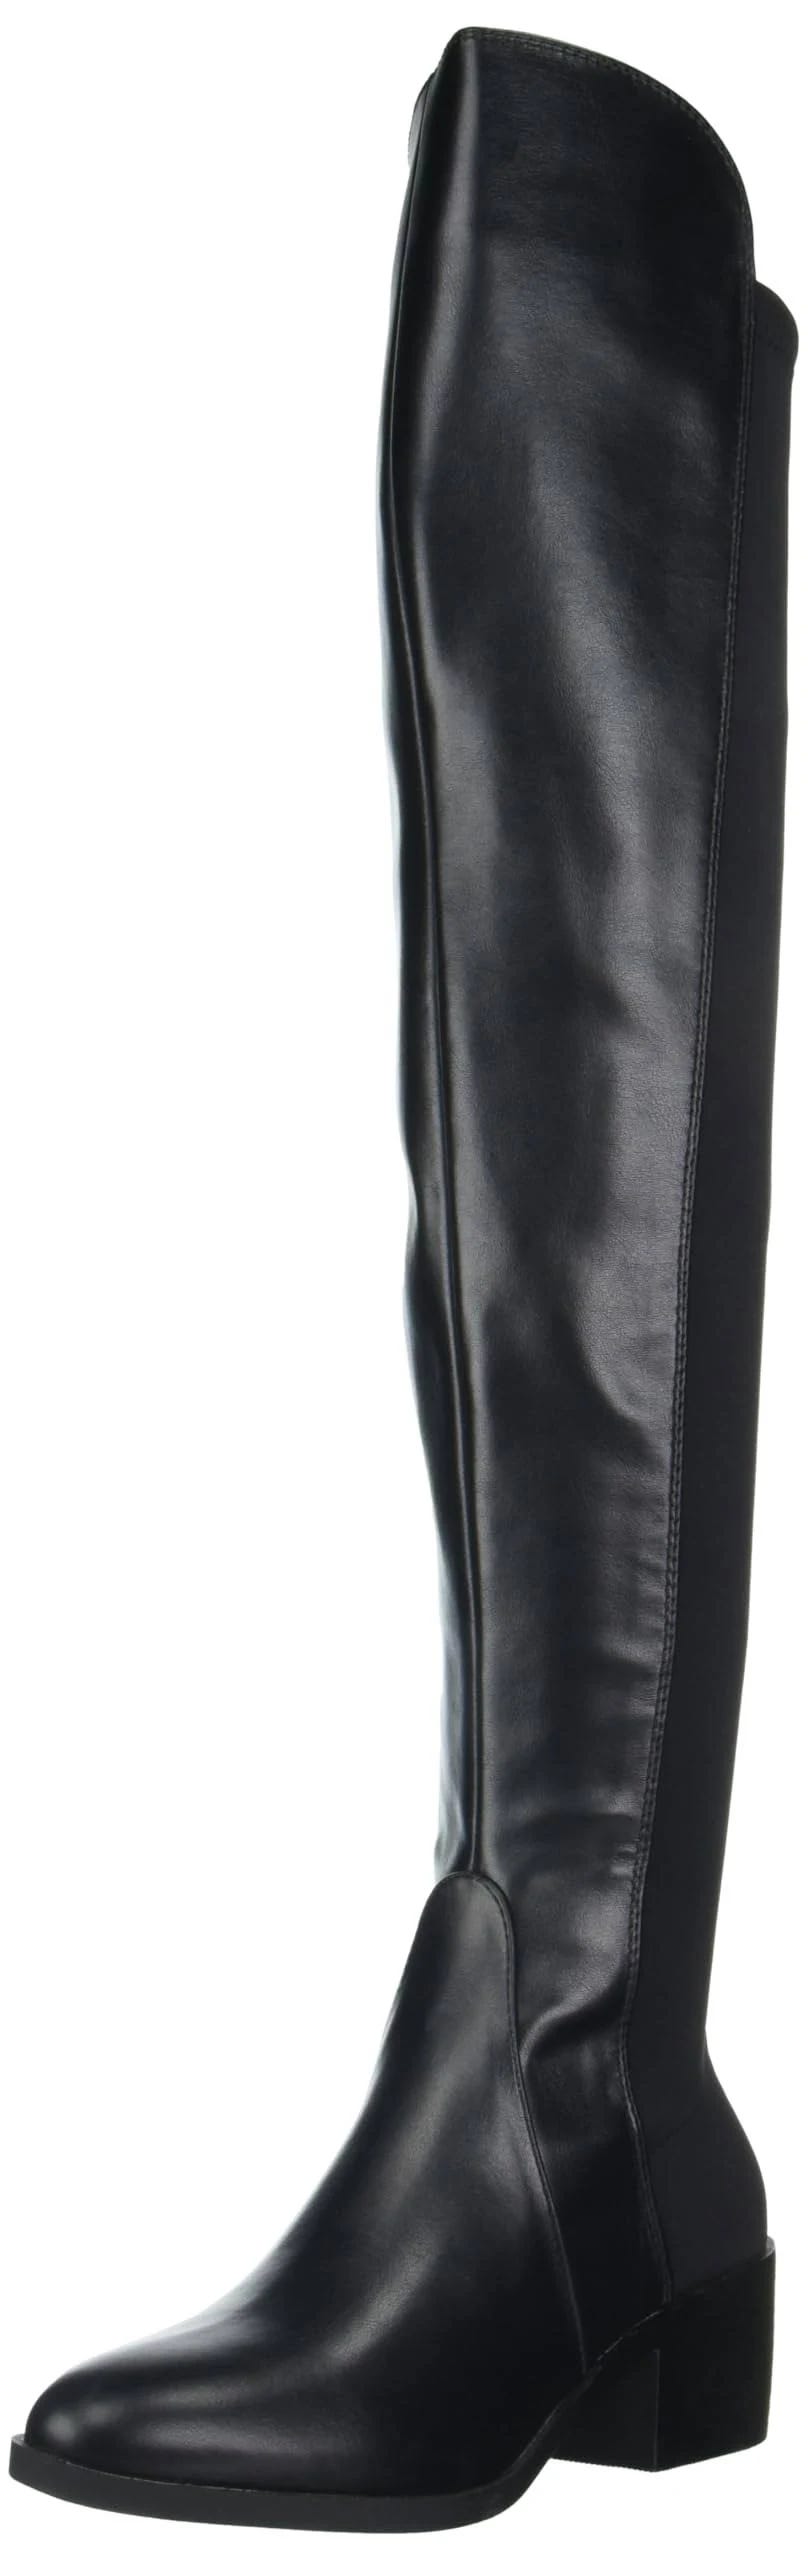 Stretchy over-the-knee boot for a sleek and secure fit | Image